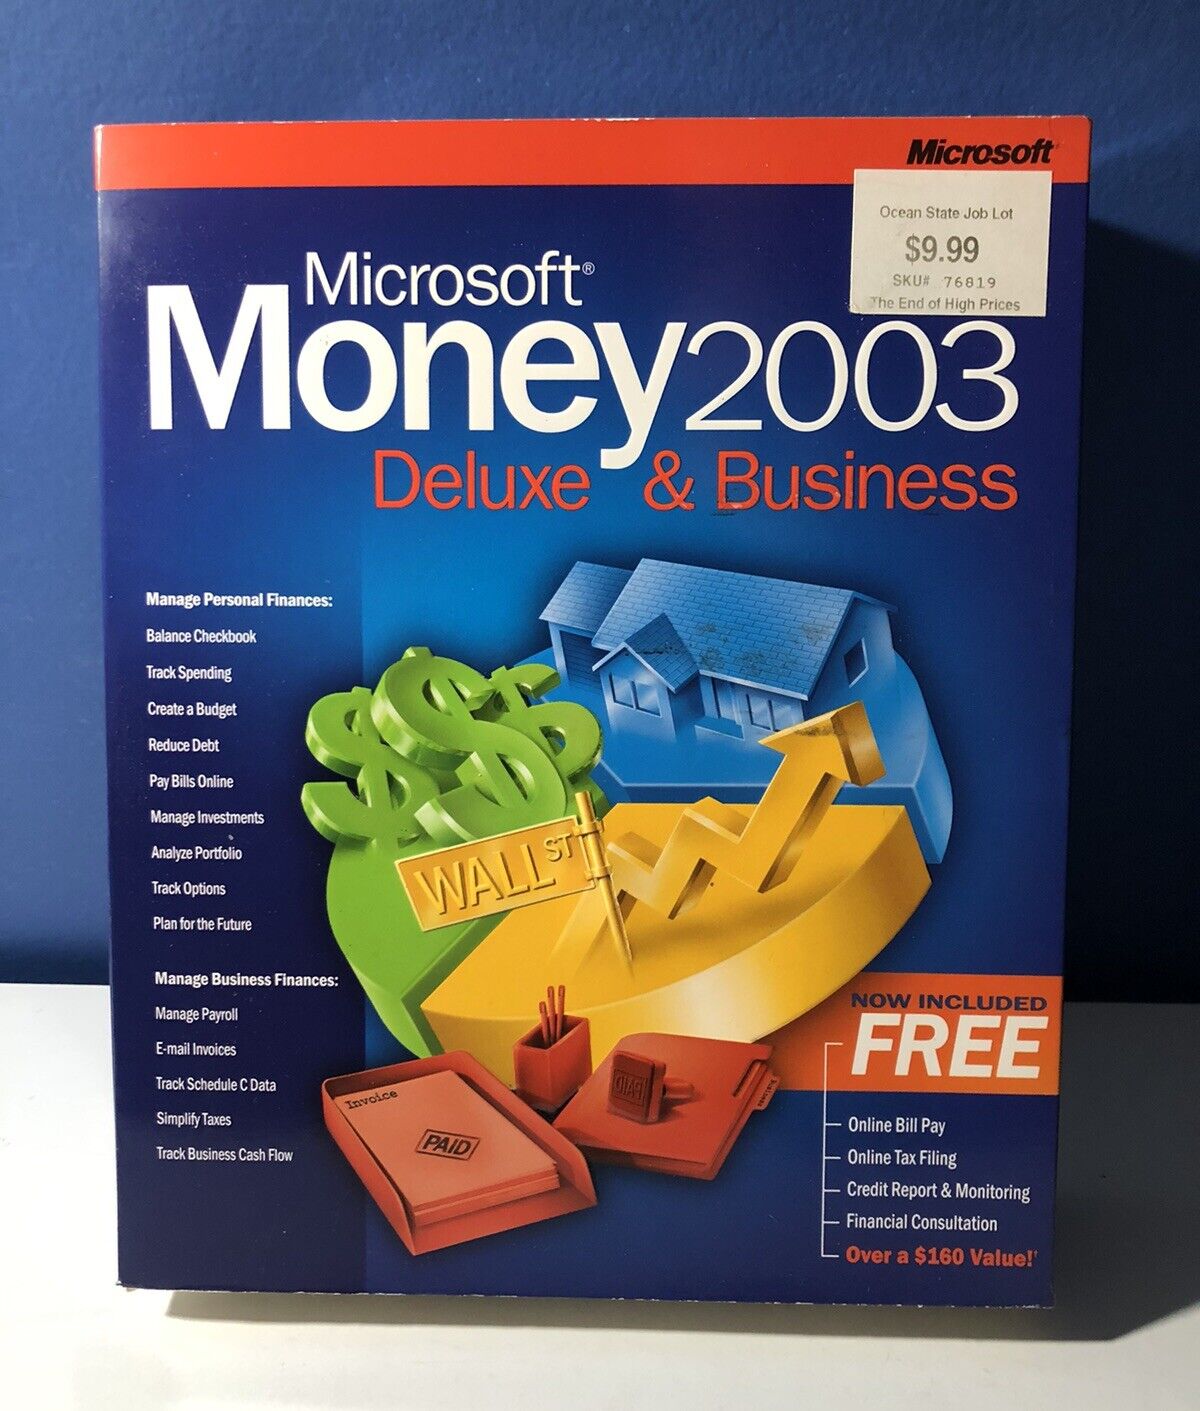 New/Sealed NOS Microsoft Money 2003 Deluxe software for Windows